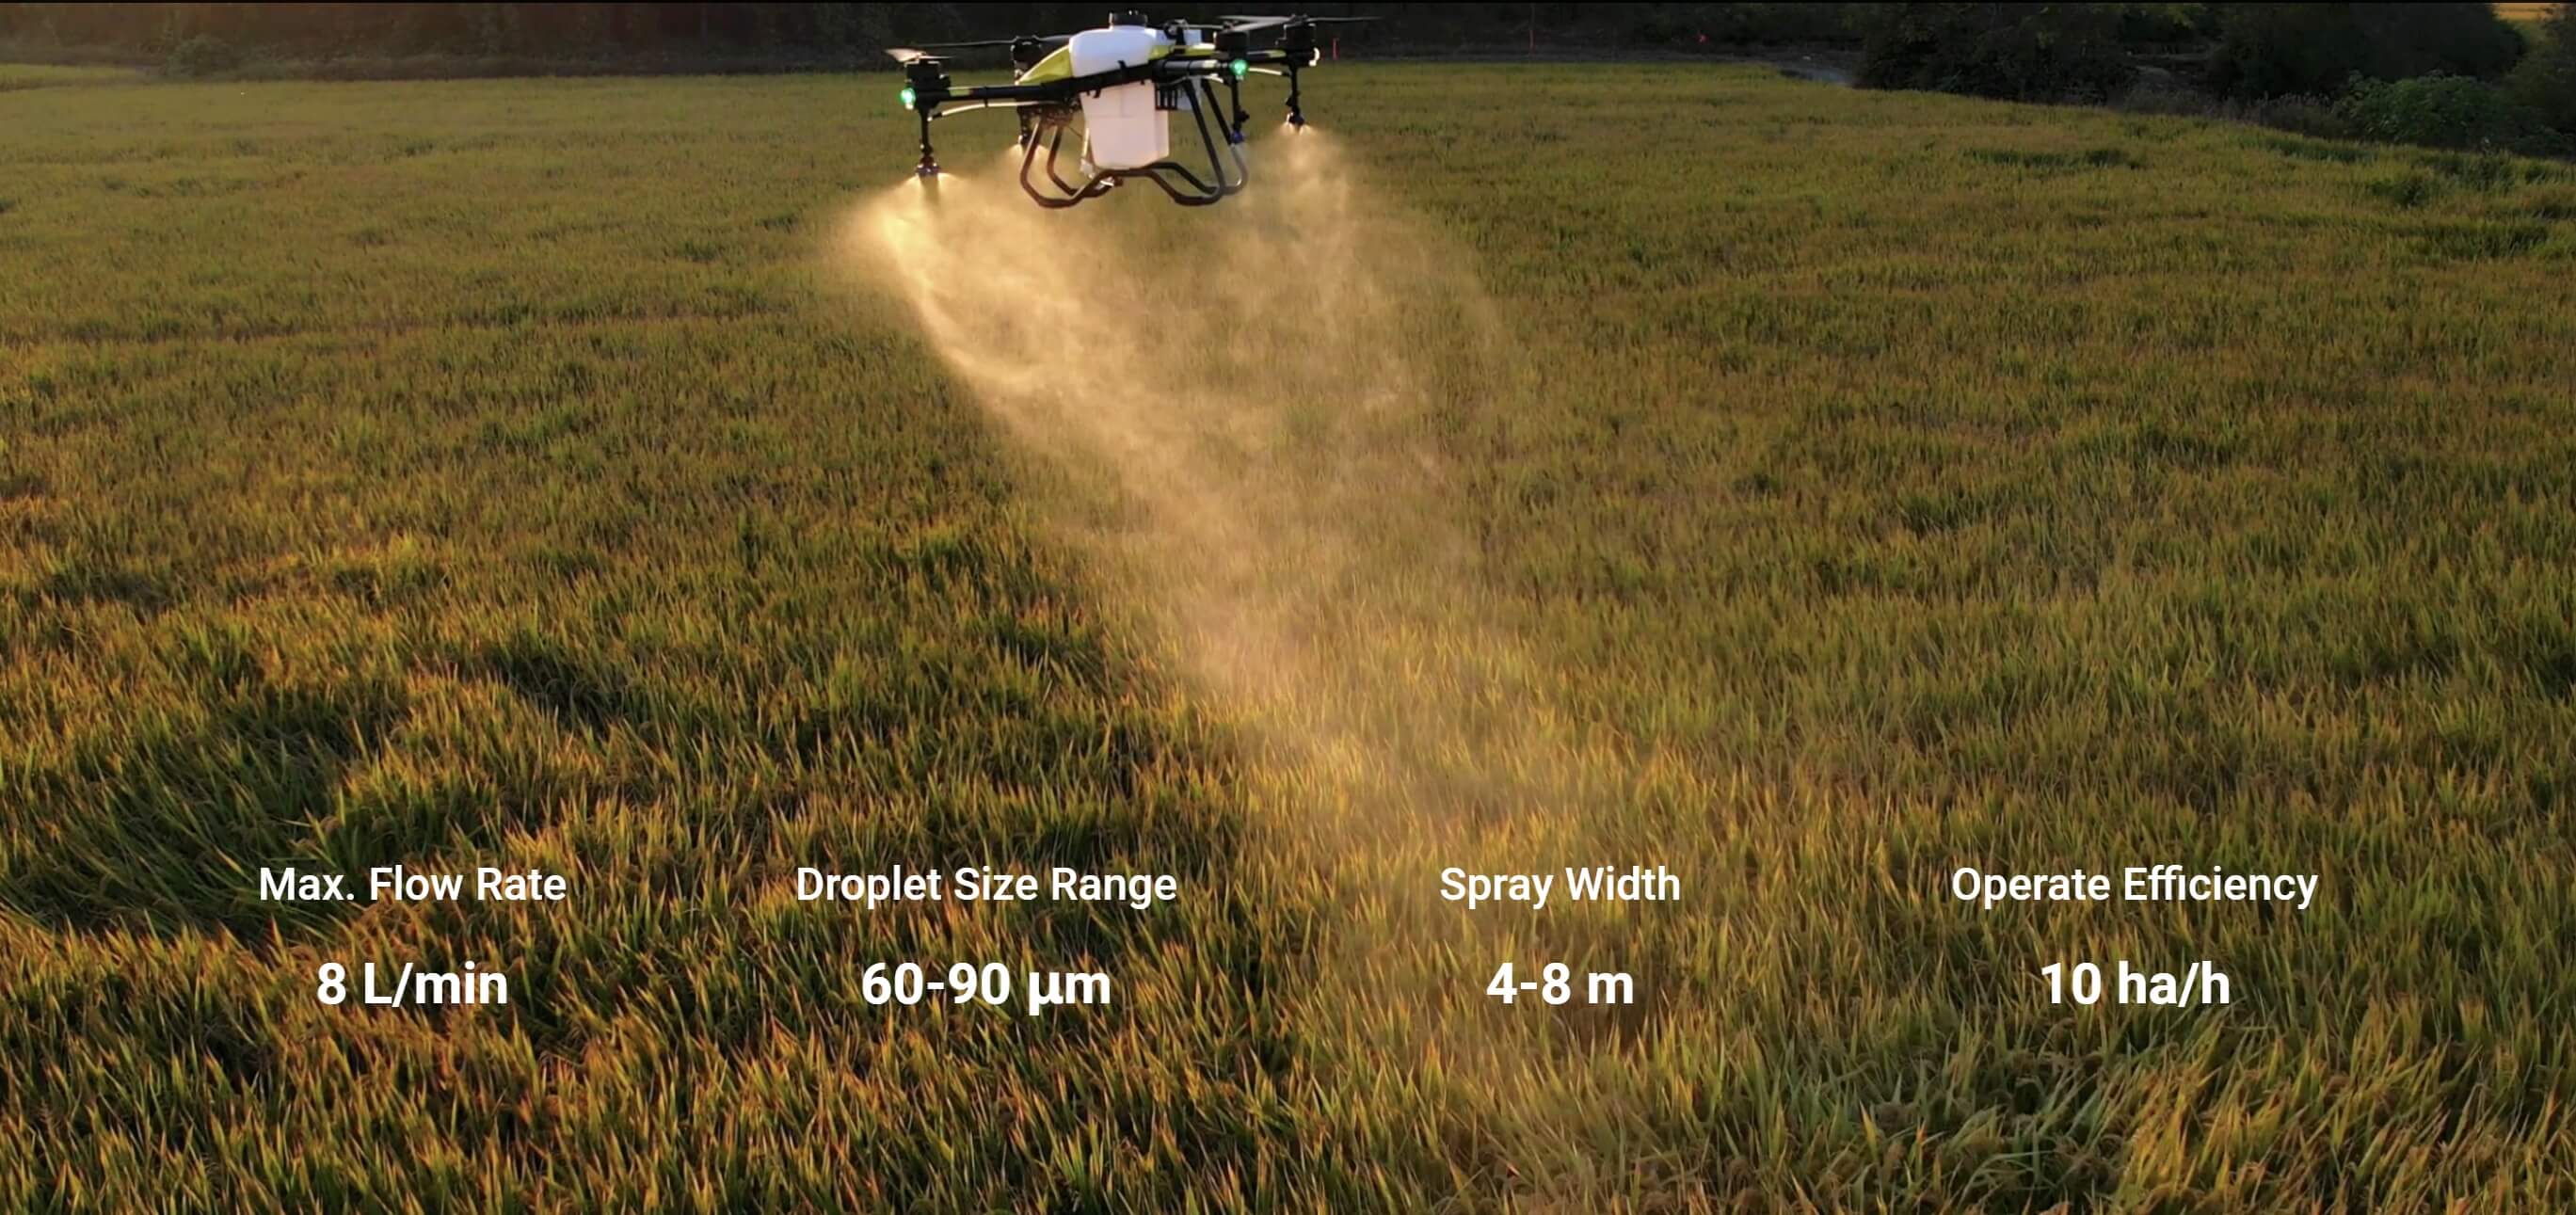 H32X Agriculture Drone, Max. Flow Rate Droplet Size Range Spray Width Operate Efficiency 8 LI